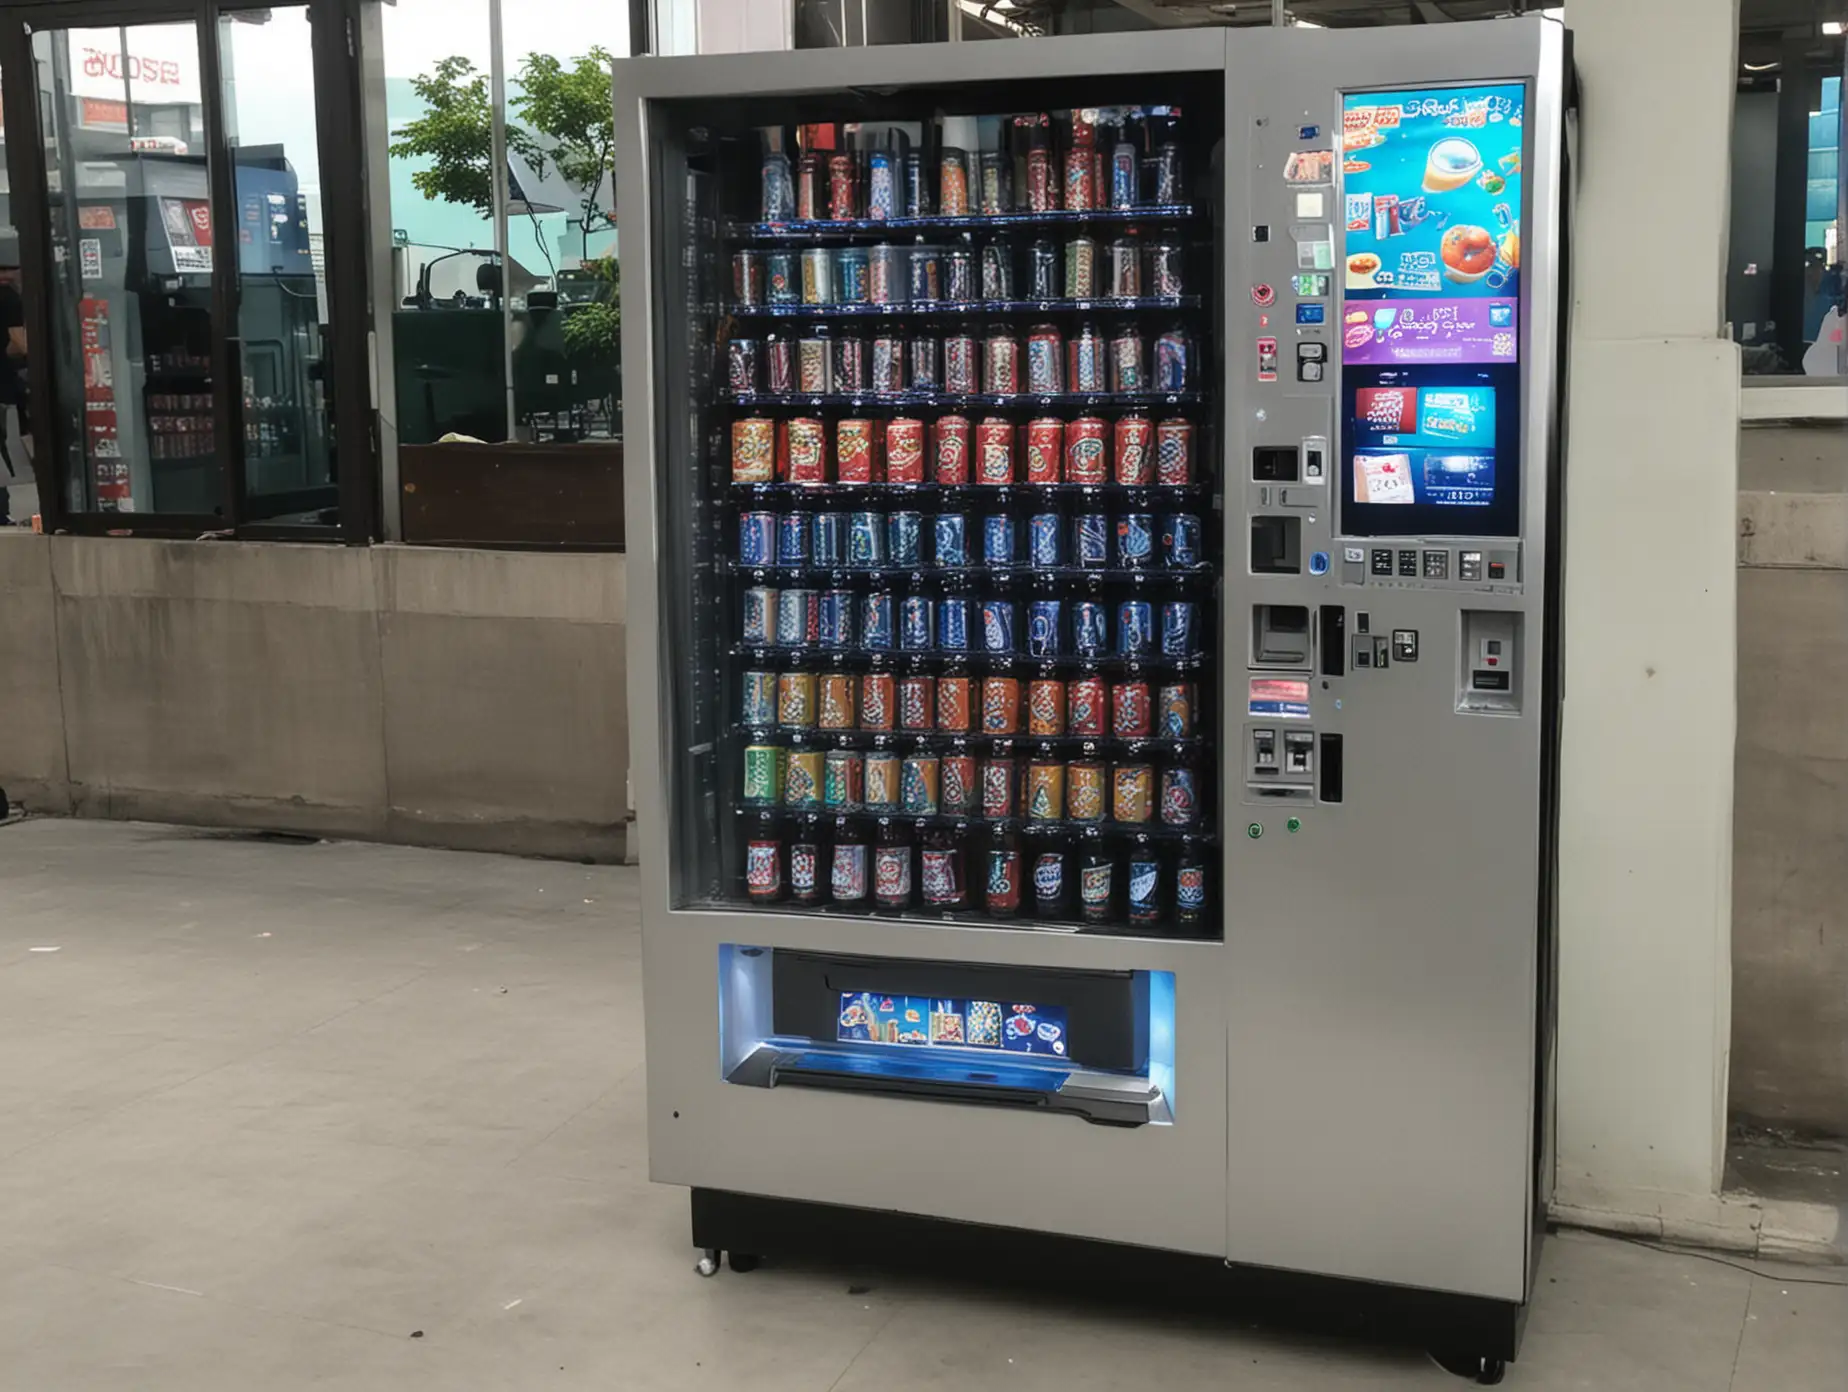 all automatic drink retail vending machine, operation screen is air holographic screen